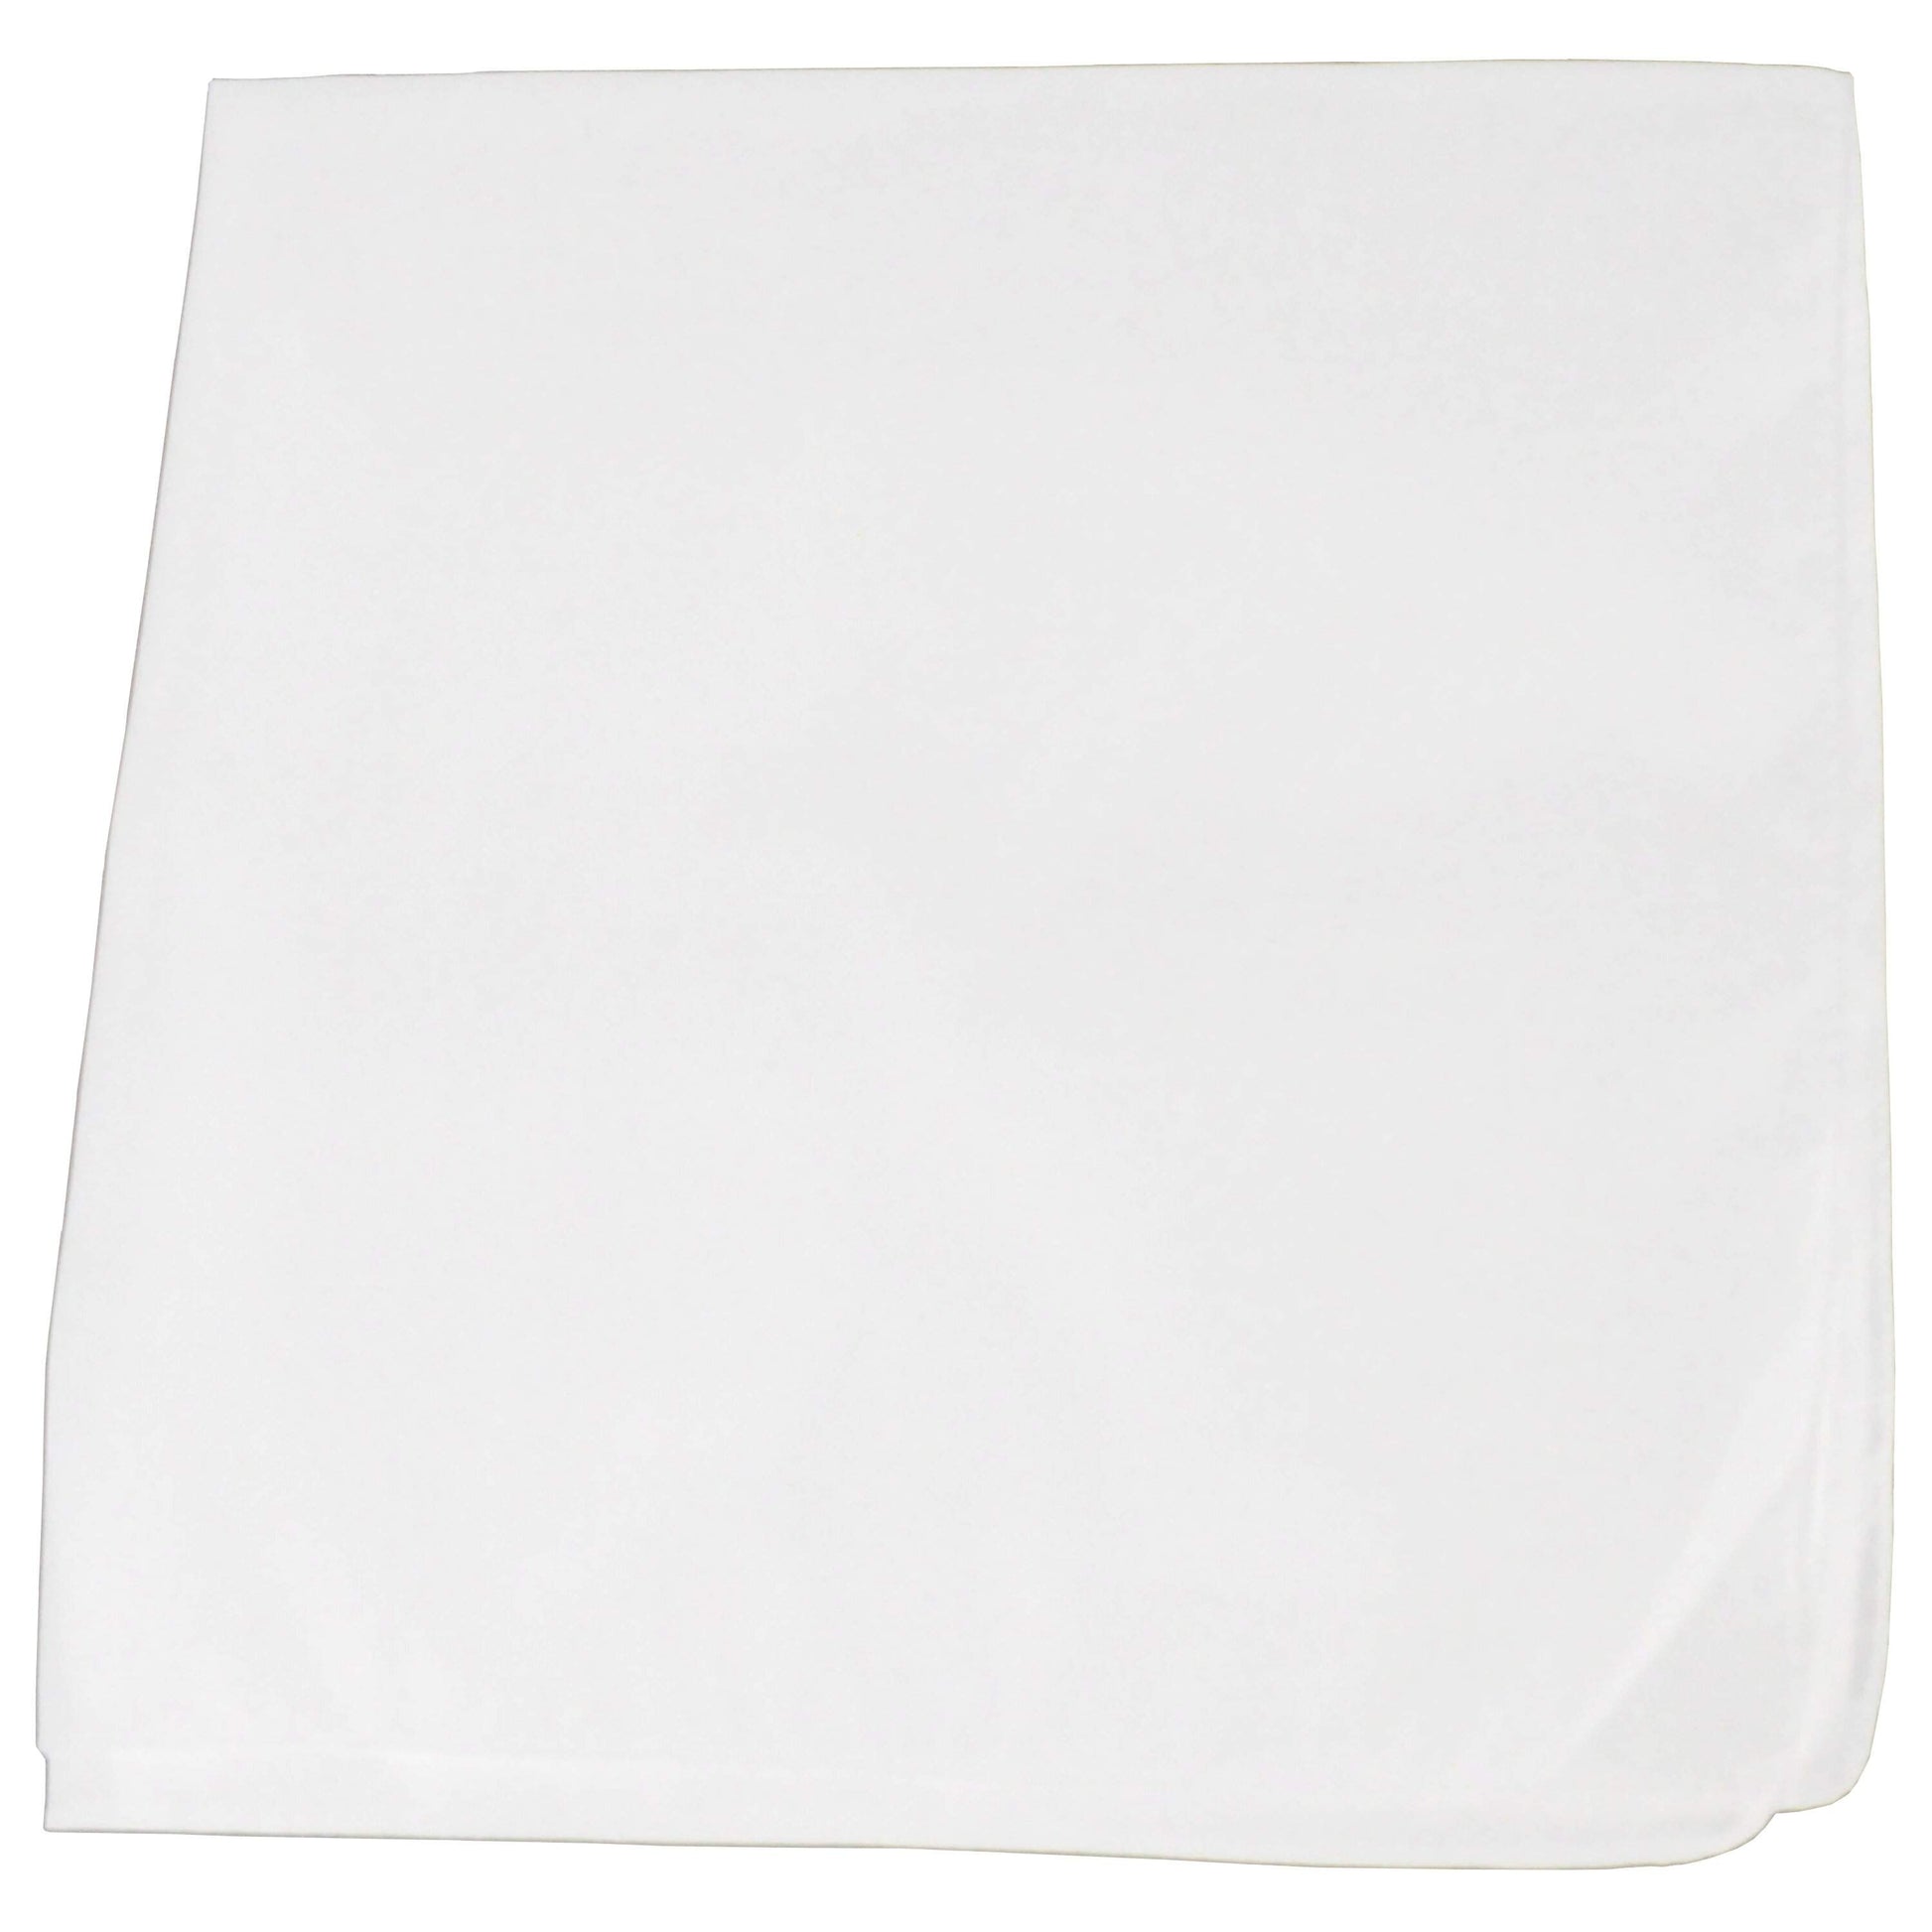 Pack of 30 Plain Polyester 22 x 22 Inch Bandanas